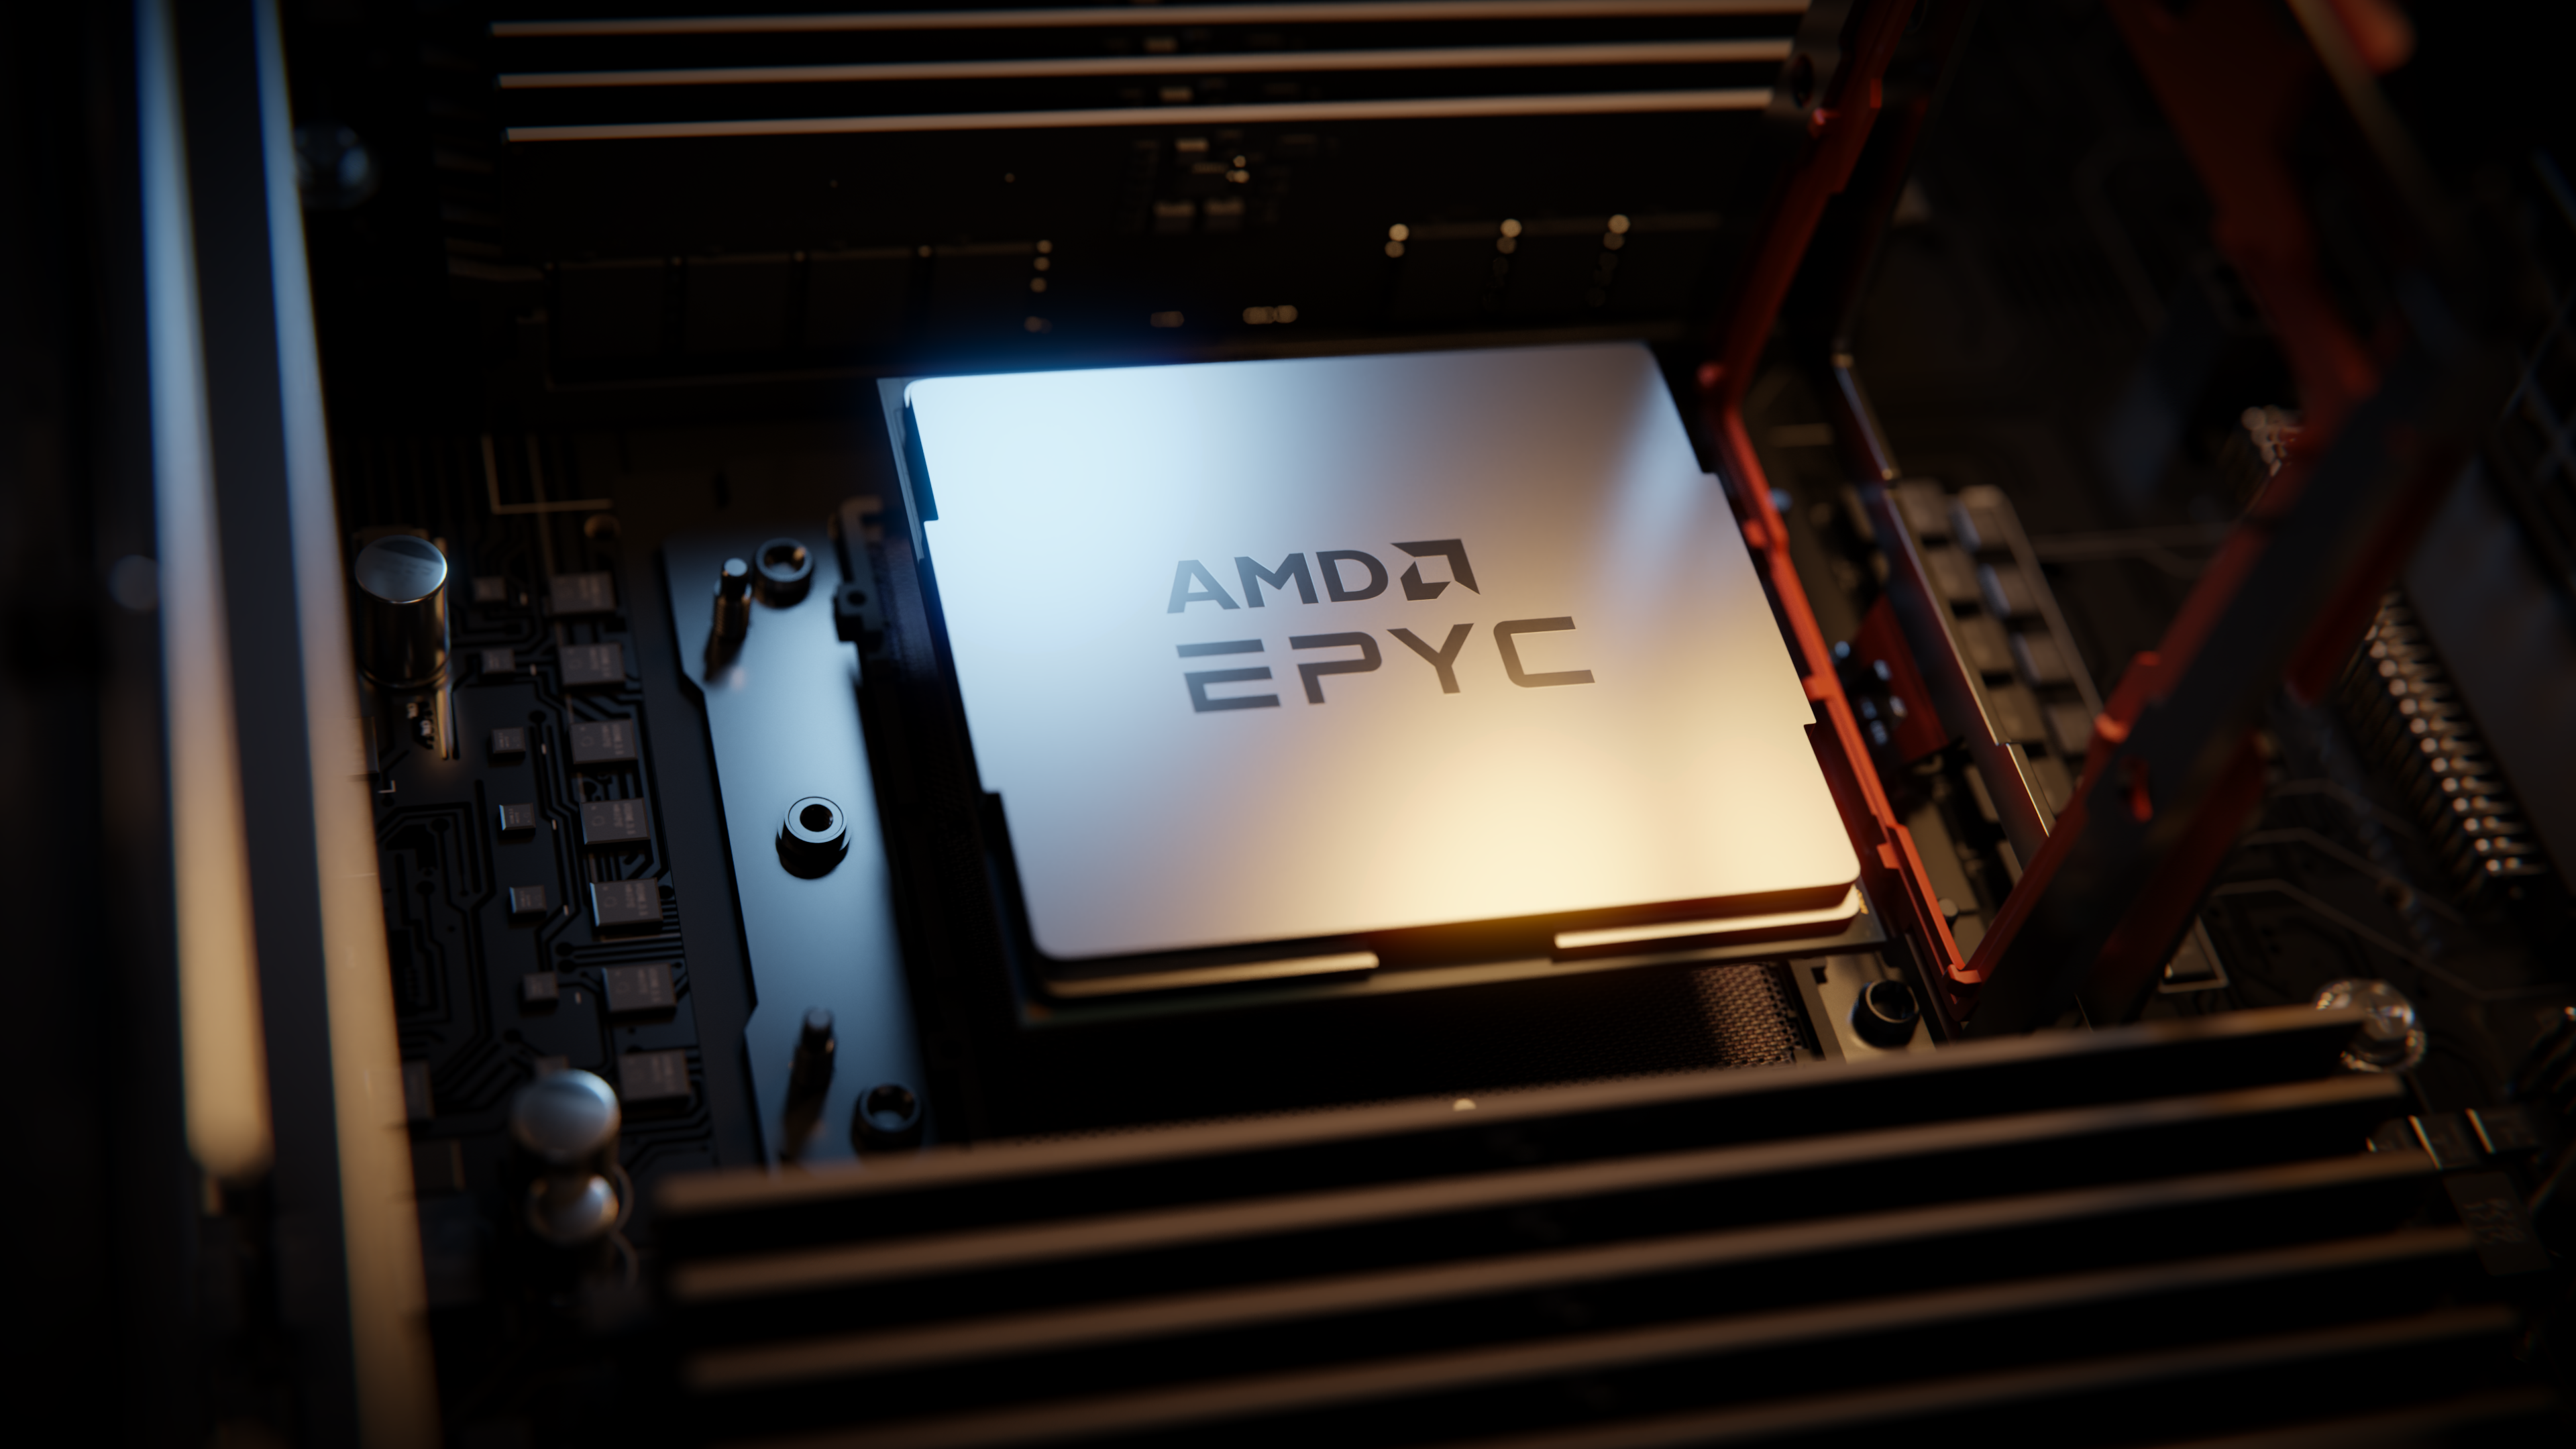 2 AMD Analysts Turn Bullish: 'This Has Historically Been A Very Strong Buy Signal'